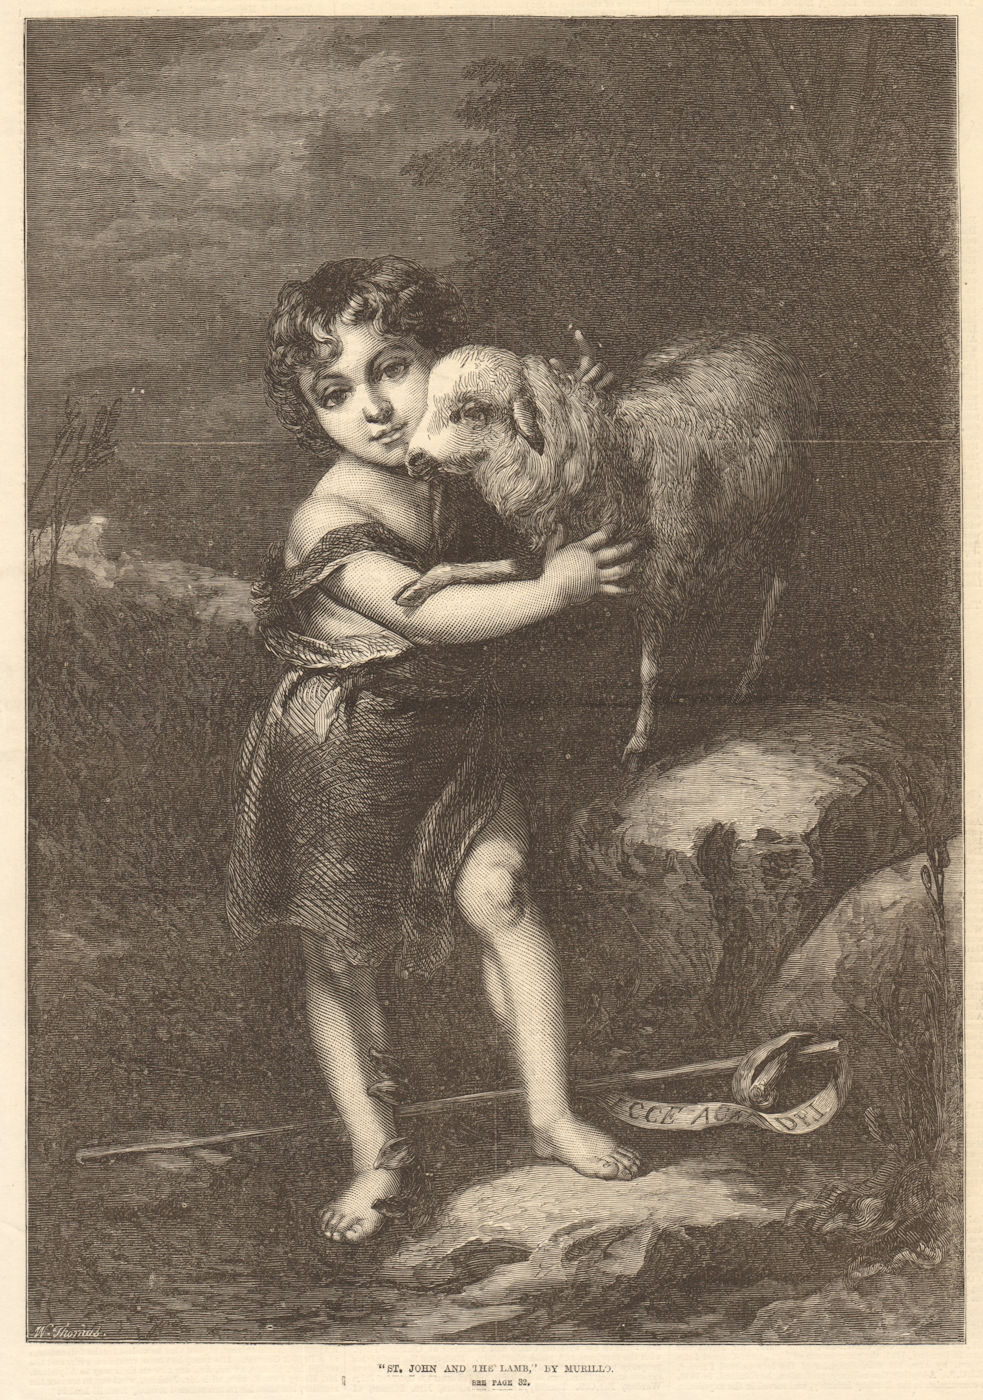 "St. John & the lamb, ~ by Murillo. Fine Arts. Bible 1870 old antique print